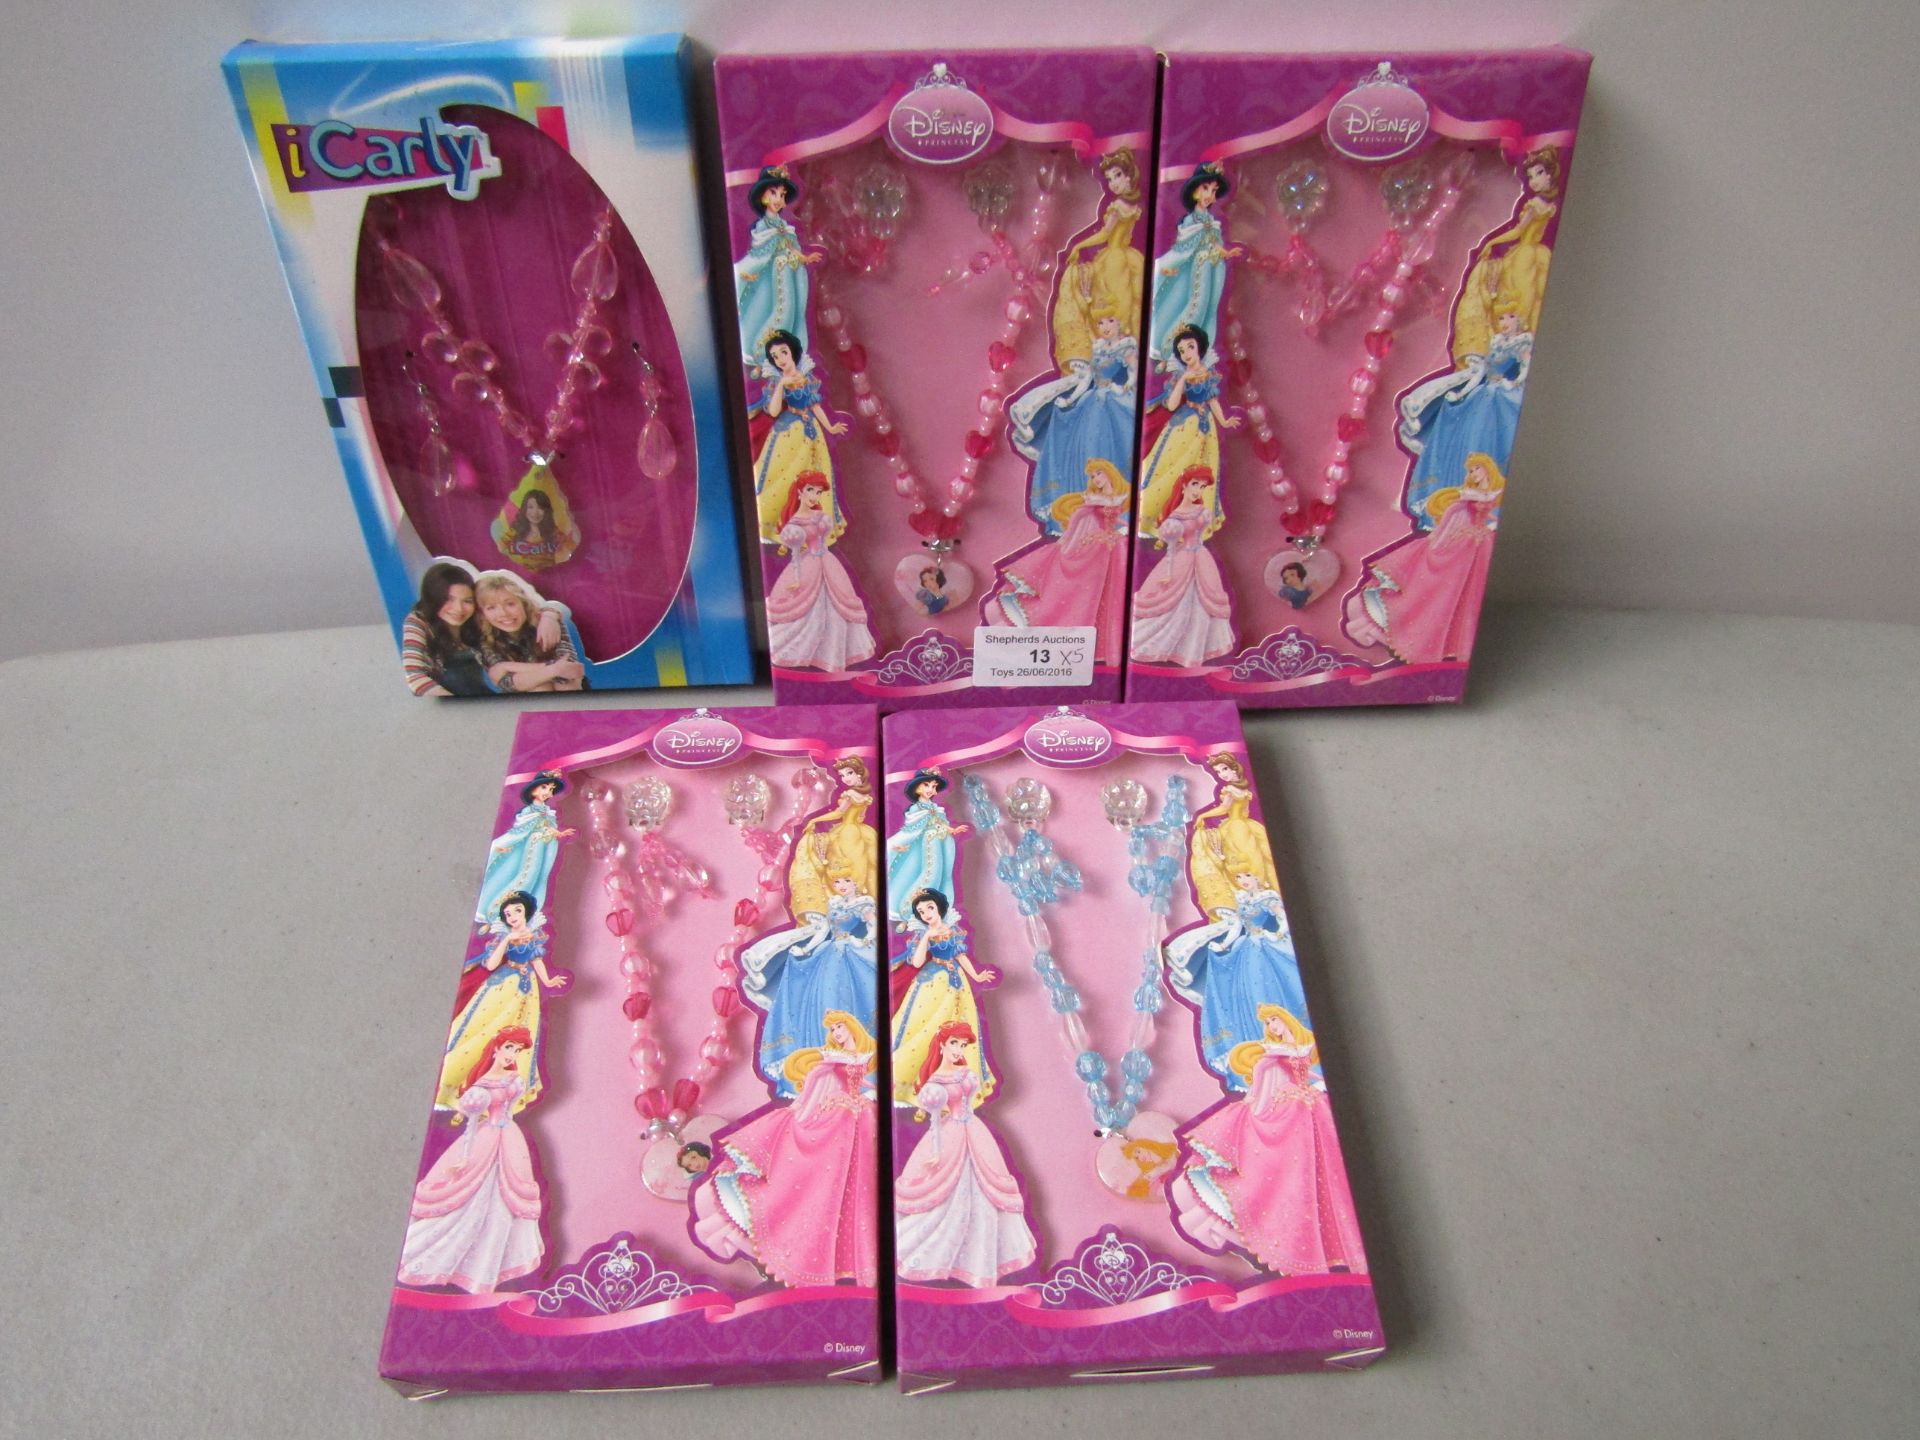 5x Sets of Jewellery (Necklace & Earings): - 4x are Disney Princess' - 1x is iCarley All Boxed.